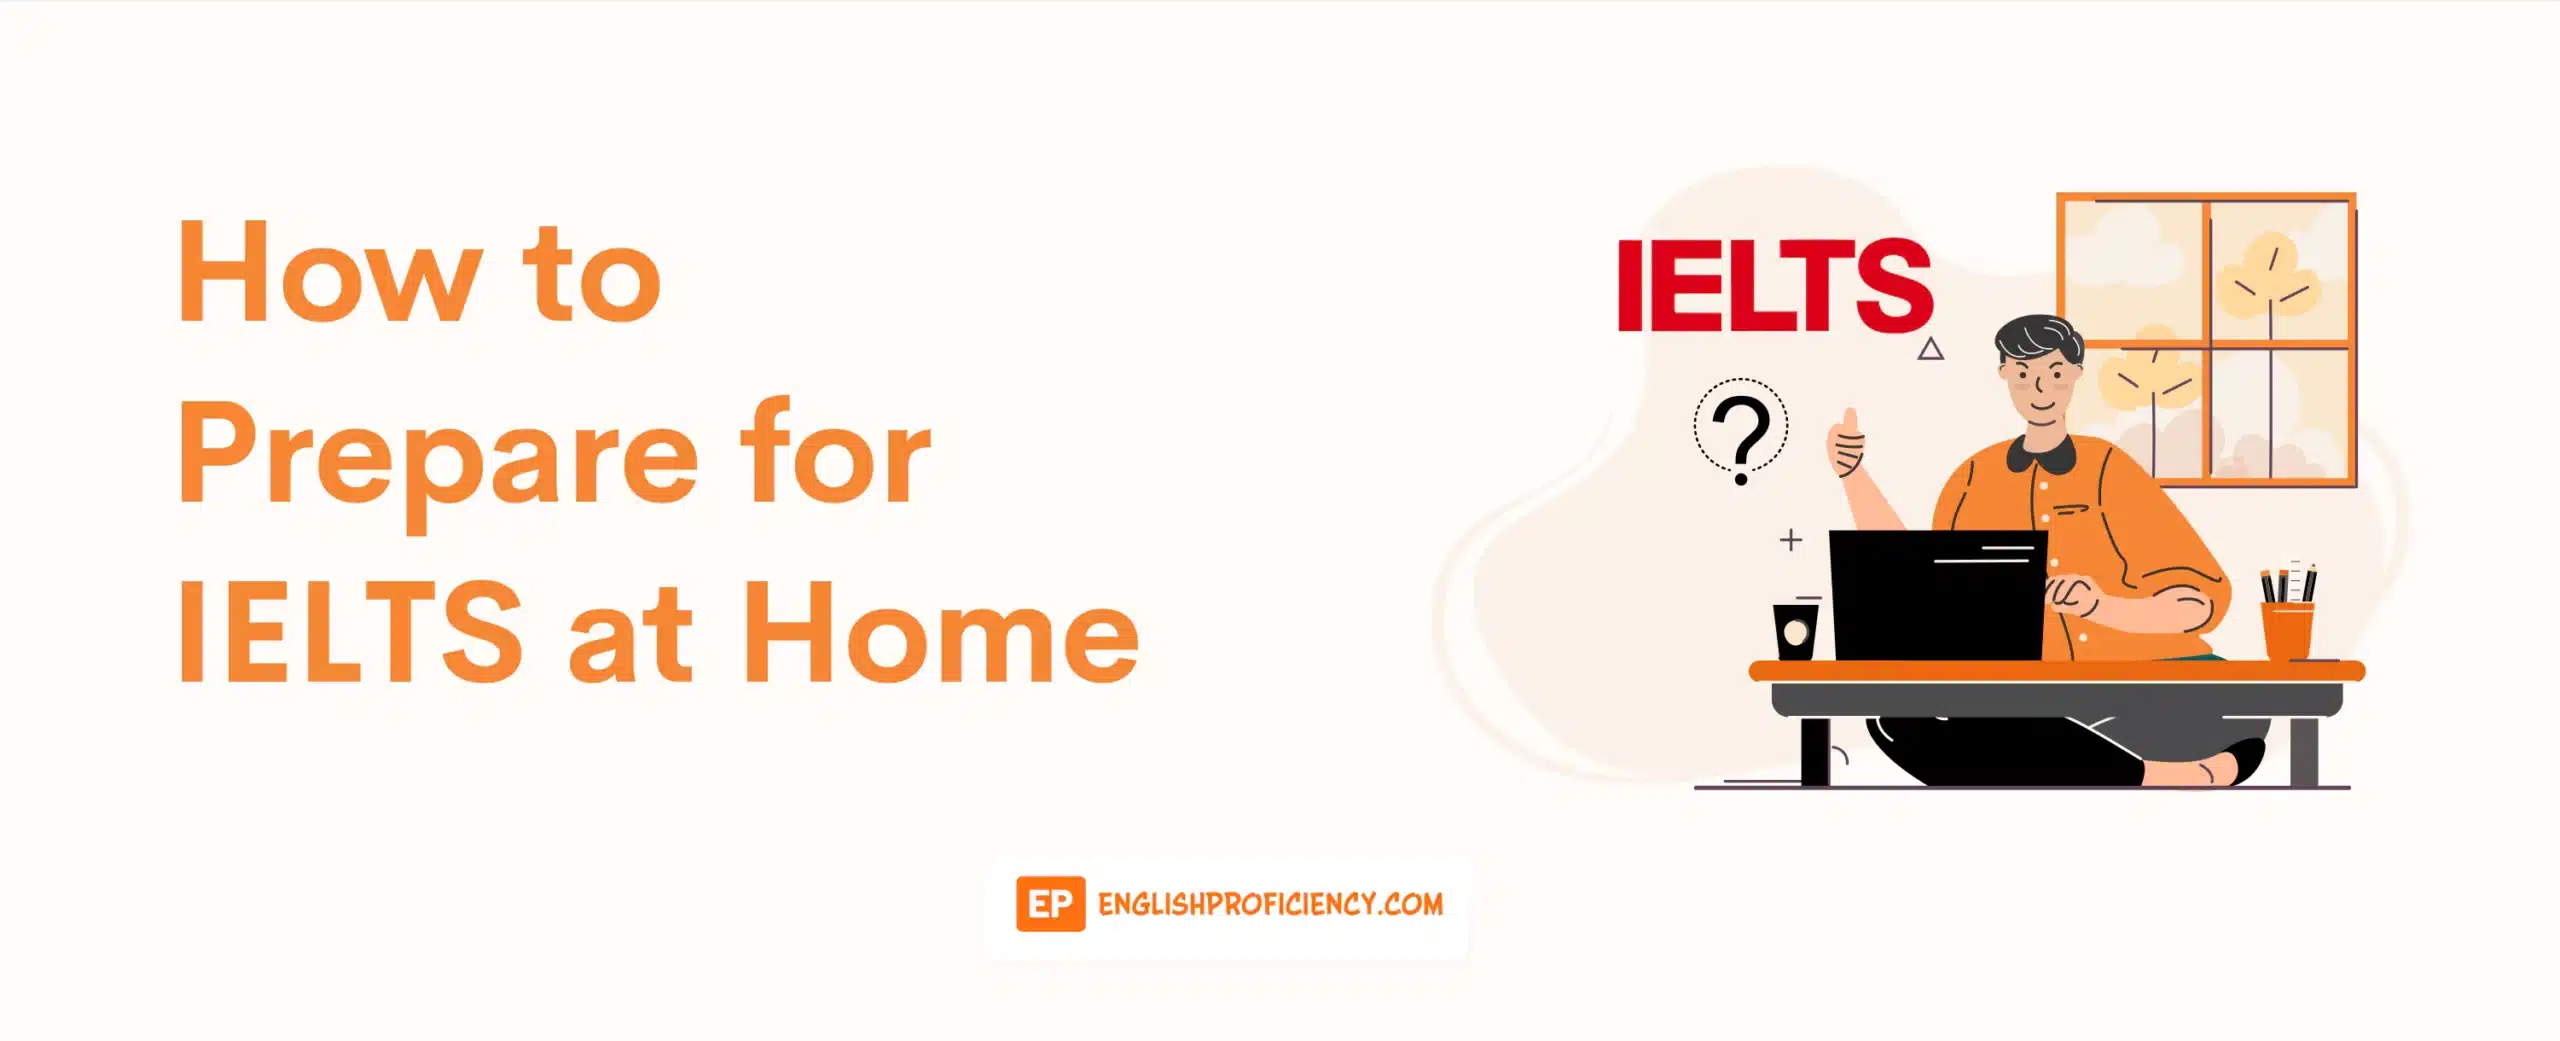 How to Prepare for IELTS at Home